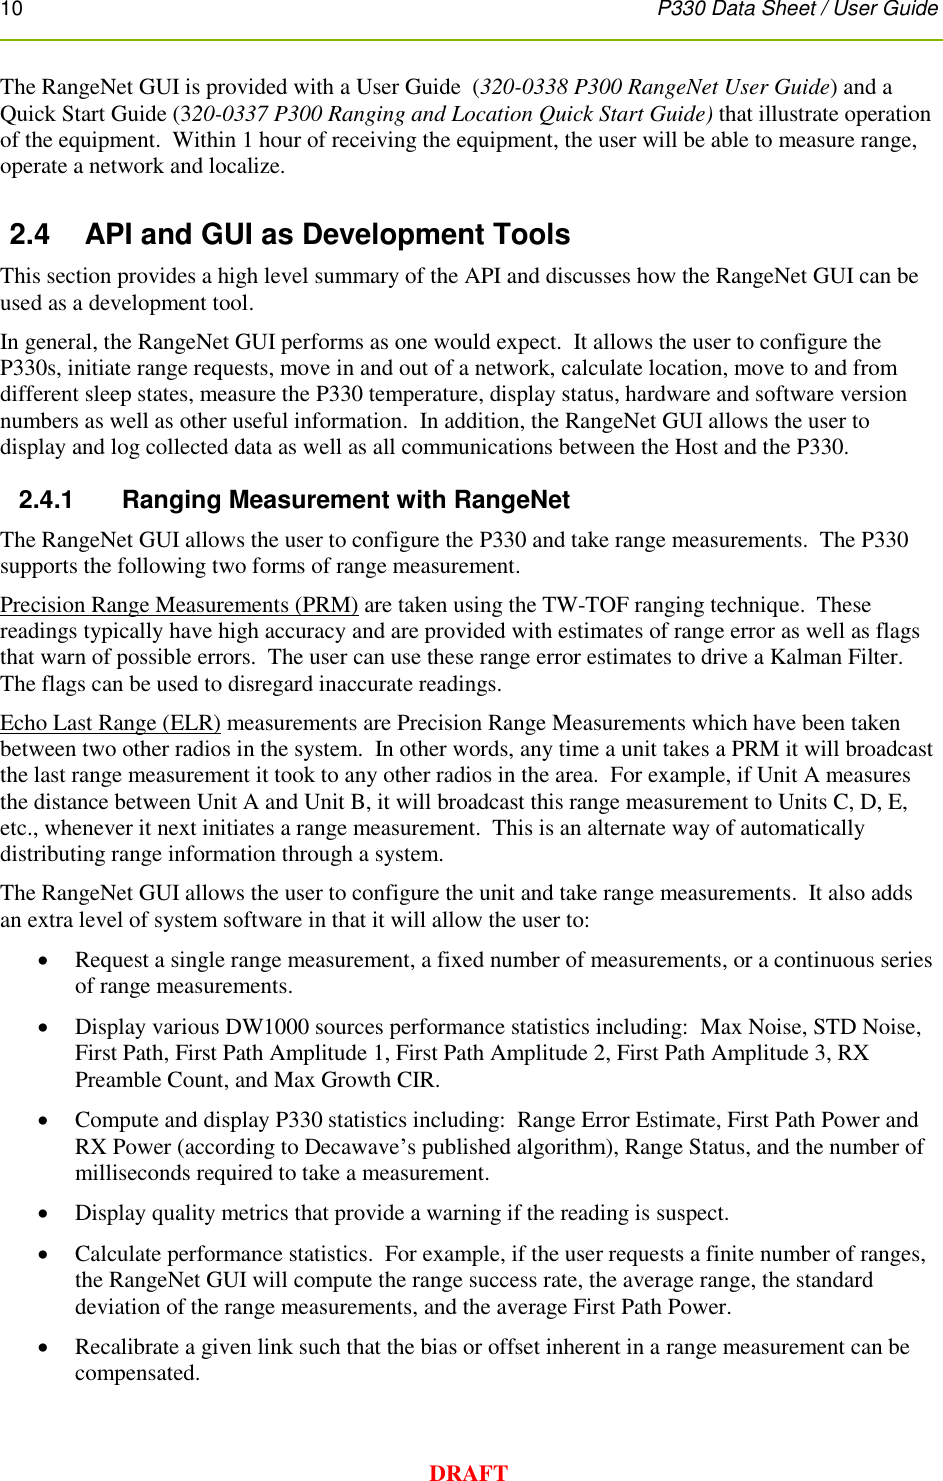 10      P330 Data Sheet / User Guide  DRAFT The RangeNet GUI is provided with a User Guide  (320-0338 P300 RangeNet User Guide) and a Quick Start Guide (320-0337 P300 Ranging and Location Quick Start Guide) that illustrate operation of the equipment.  Within 1 hour of receiving the equipment, the user will be able to measure range, operate a network and localize.  2.4  API and GUI as Development Tools This section provides a high level summary of the API and discusses how the RangeNet GUI can be used as a development tool. In general, the RangeNet GUI performs as one would expect.  It allows the user to configure the P330s, initiate range requests, move in and out of a network, calculate location, move to and from different sleep states, measure the P330 temperature, display status, hardware and software version numbers as well as other useful information.  In addition, the RangeNet GUI allows the user to display and log collected data as well as all communications between the Host and the P330.  2.4.1      Ranging Measurement with RangeNet The RangeNet GUI allows the user to configure the P330 and take range measurements.  The P330 supports the following two forms of range measurement. Precision Range Measurements (PRM) are taken using the TW-TOF ranging technique.  These readings typically have high accuracy and are provided with estimates of range error as well as flags that warn of possible errors.  The user can use these range error estimates to drive a Kalman Filter.  The flags can be used to disregard inaccurate readings. Echo Last Range (ELR) measurements are Precision Range Measurements which have been taken between two other radios in the system.  In other words, any time a unit takes a PRM it will broadcast the last range measurement it took to any other radios in the area.  For example, if Unit A measures the distance between Unit A and Unit B, it will broadcast this range measurement to Units C, D, E, etc., whenever it next initiates a range measurement.  This is an alternate way of automatically distributing range information through a system. The RangeNet GUI allows the user to configure the unit and take range measurements.  It also adds an extra level of system software in that it will allow the user to:  Request a single range measurement, a fixed number of measurements, or a continuous series of range measurements.  Display various DW1000 sources performance statistics including:  Max Noise, STD Noise, First Path, First Path Amplitude 1, First Path Amplitude 2, First Path Amplitude 3, RX Preamble Count, and Max Growth CIR.    Compute and display P330 statistics including:  Range Error Estimate, First Path Power and RX Power (according to Decawave’s published algorithm), Range Status, and the number of milliseconds required to take a measurement.  Display quality metrics that provide a warning if the reading is suspect.  Calculate performance statistics.  For example, if the user requests a finite number of ranges, the RangeNet GUI will compute the range success rate, the average range, the standard deviation of the range measurements, and the average First Path Power.  Recalibrate a given link such that the bias or offset inherent in a range measurement can be compensated. 